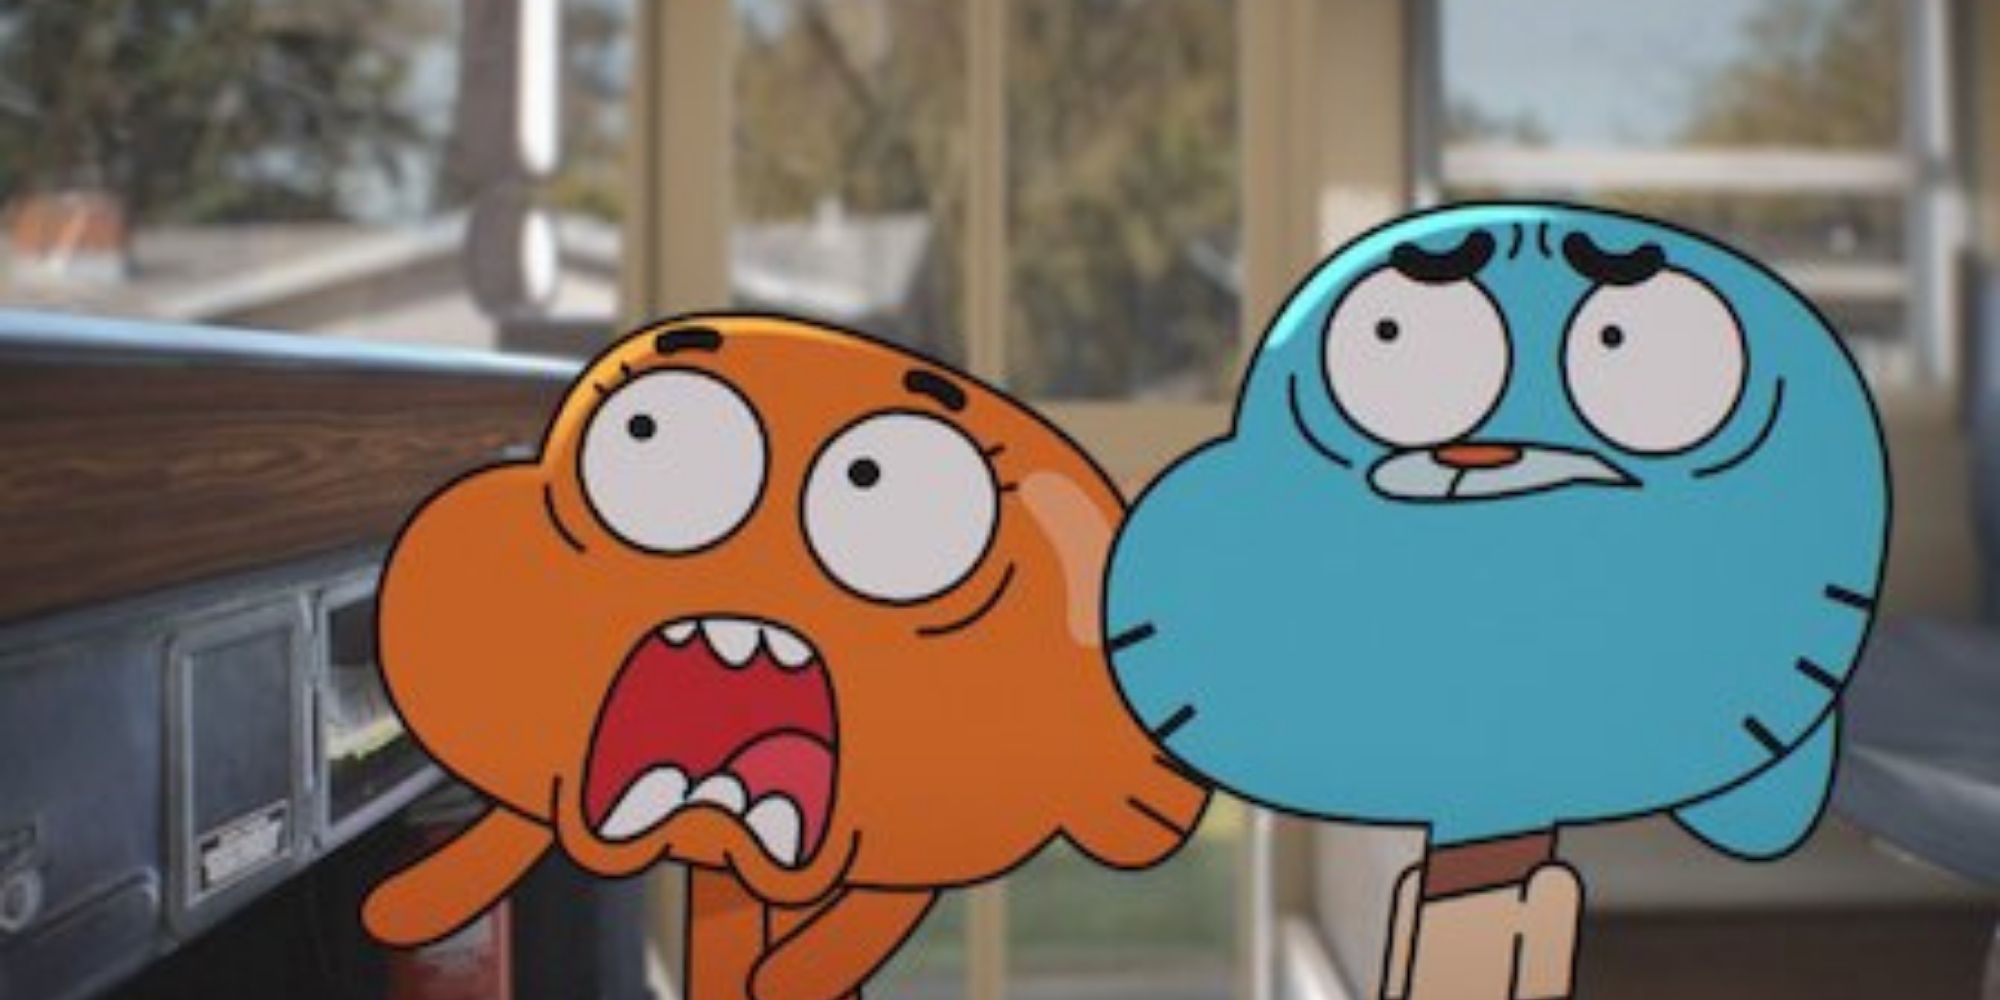 darwin and gumball disturbed in the street